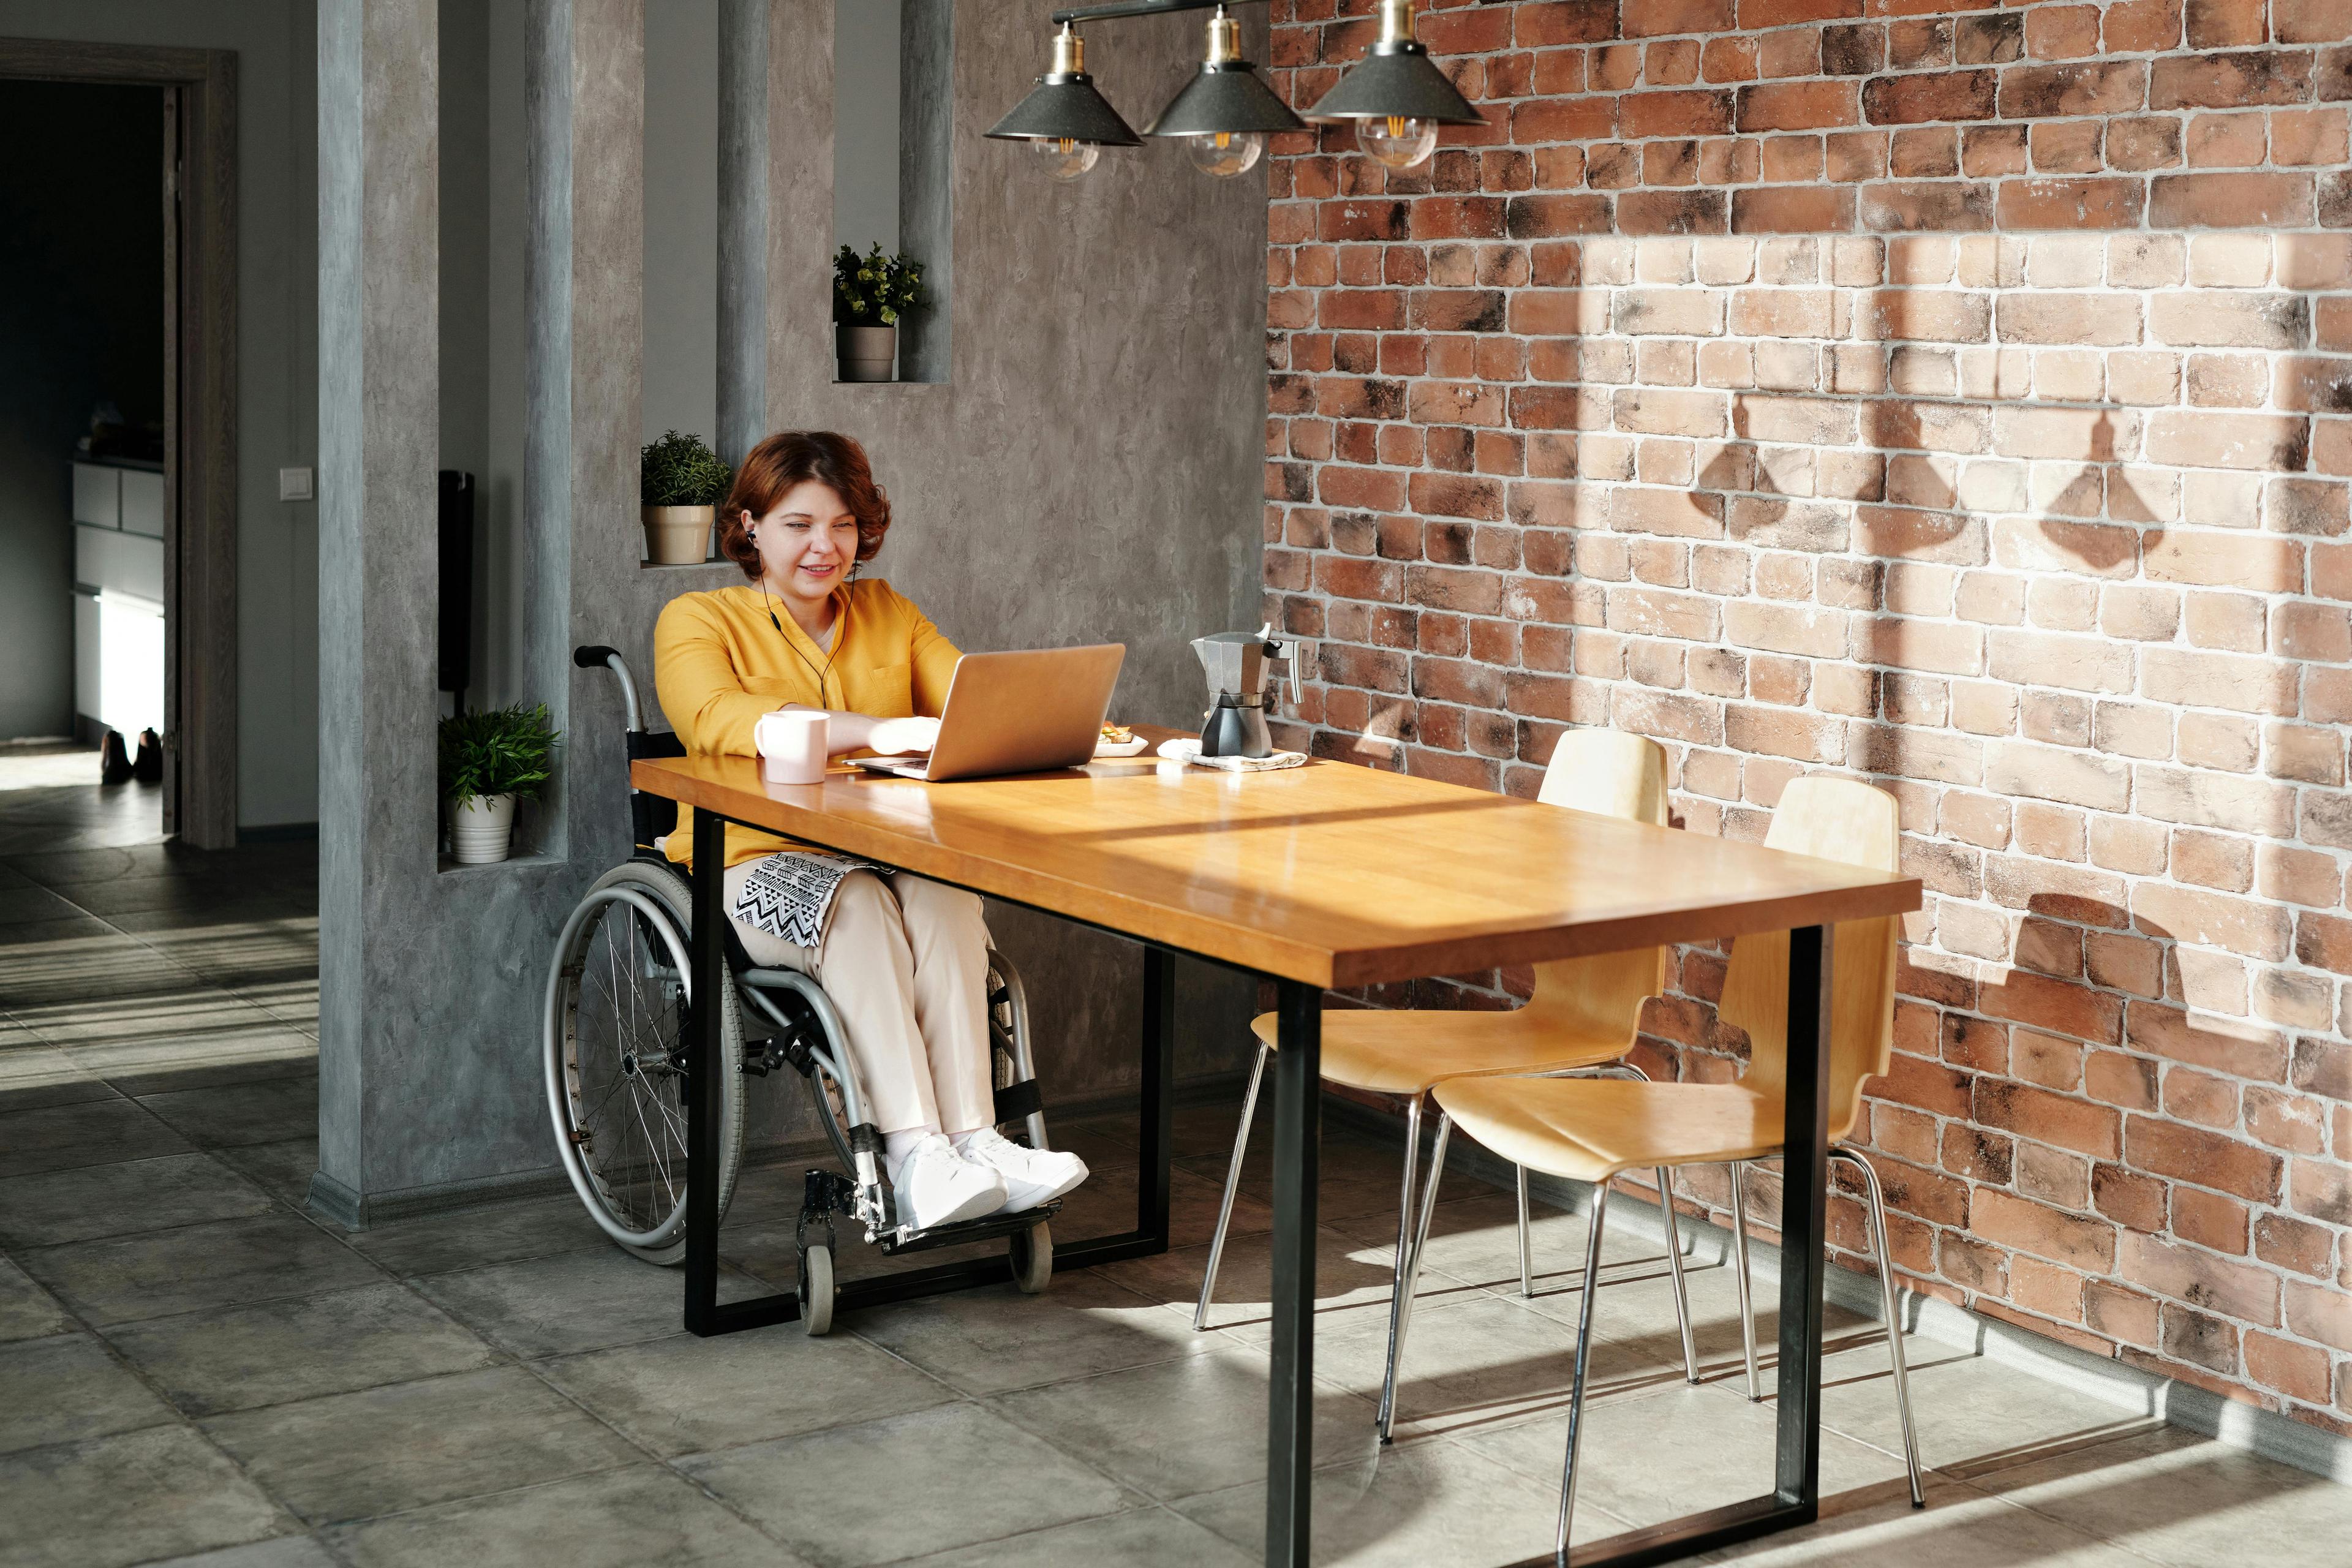 A young woman sitting in a wheelchair in a cafe using her laptop. She has a small smile and appears optimistic about what she sees on the screen.